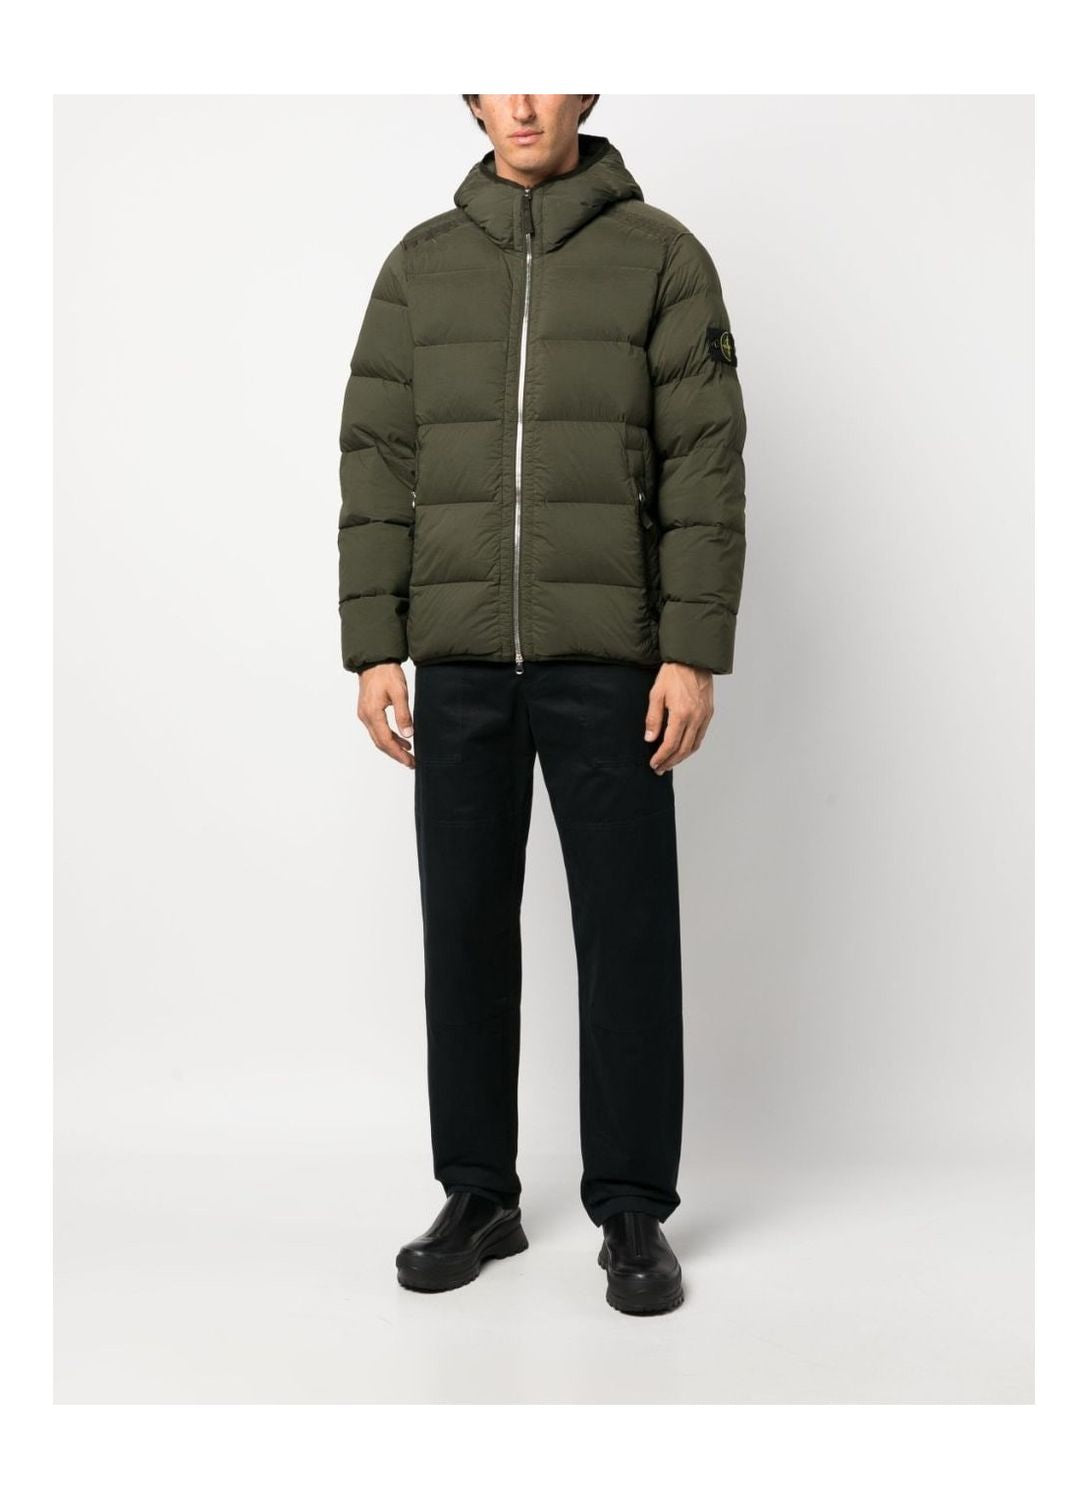 Men's Olive Outerwear for FW23 by Stone Island